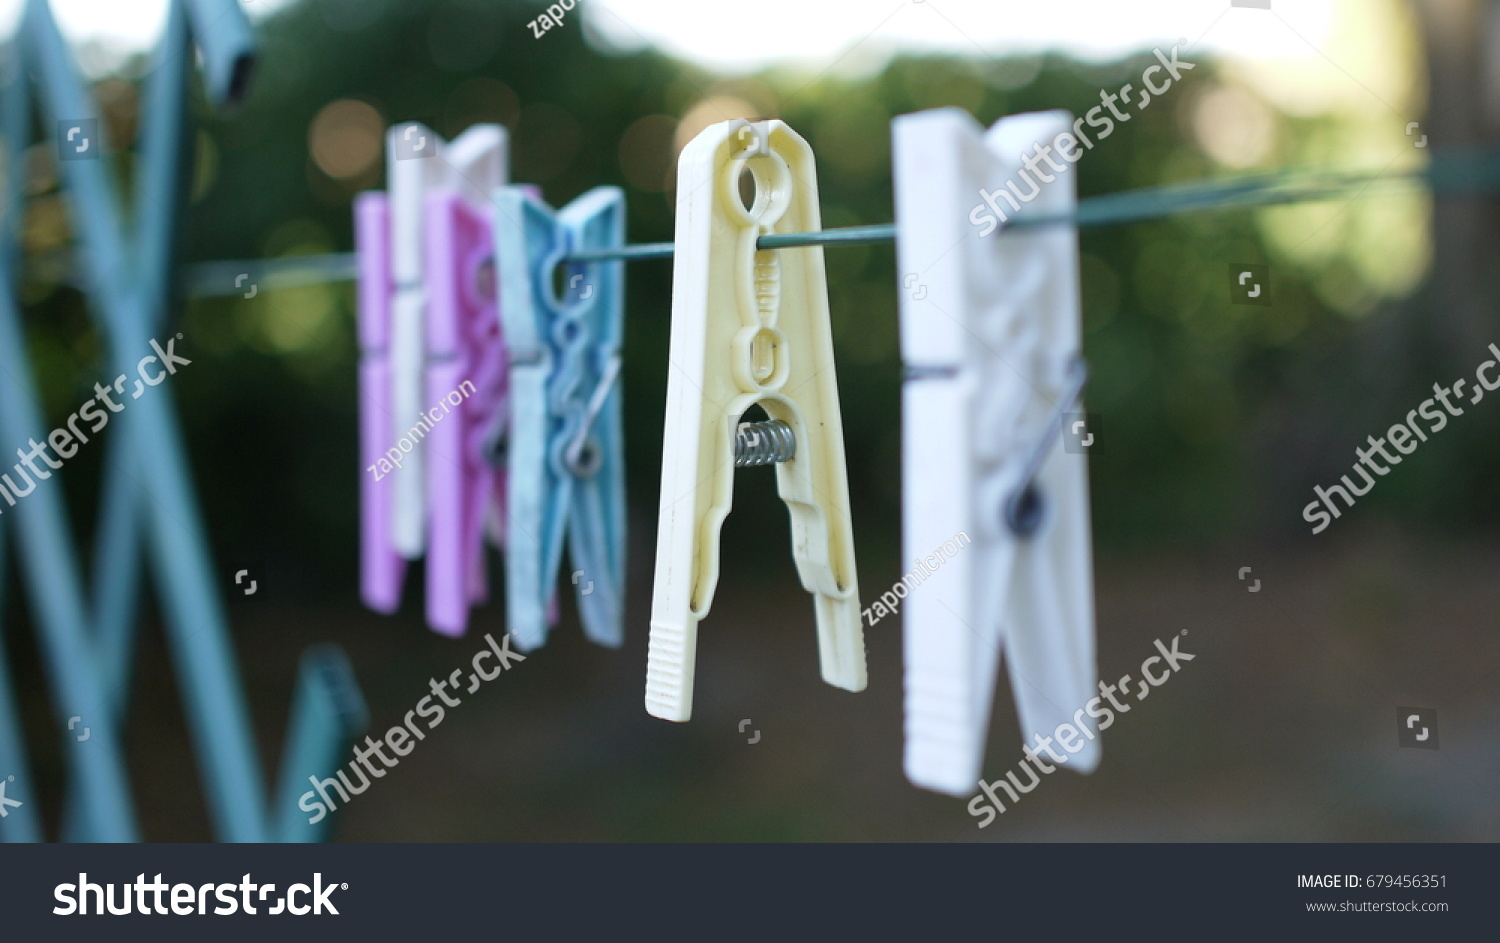 Pins on a Clothesline